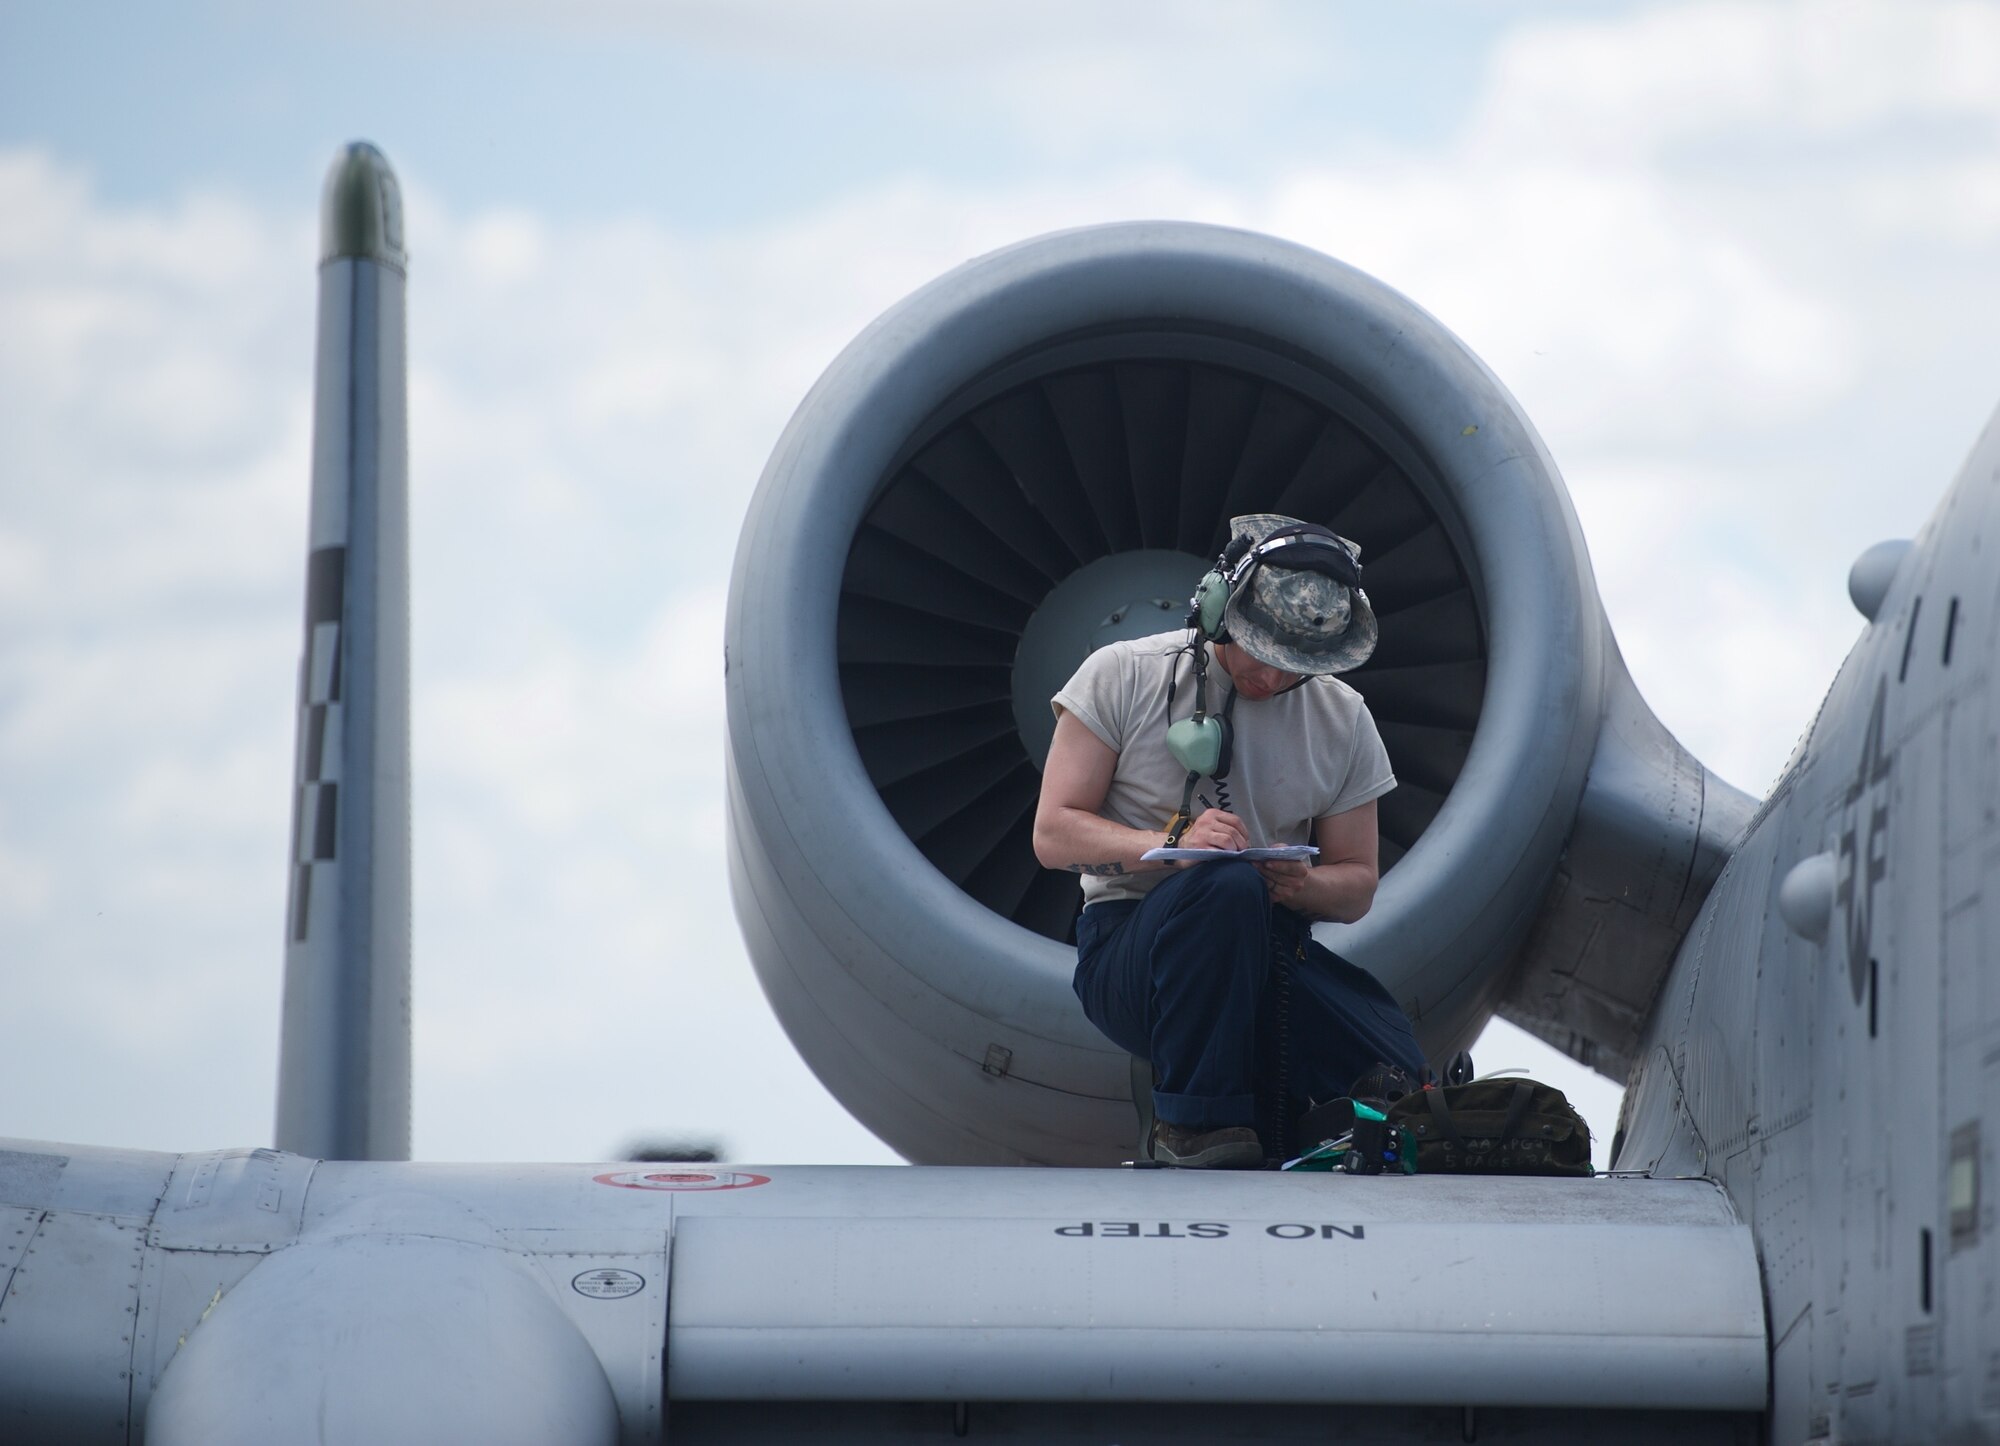 U.S. Air Force Senior Airman Peter Espinoza, A-10C Thunderbolt II crew chief, deployed from Osan Air Base, Republic of Korea, goes through a checklist for an A-10C after the aircraft conducted an air and maritime domain awareness mission intended to provide more transparent air and maritime situational awareness ensuring safety for military and civilian activities in international waters April 21, 2016, at Clark Air Base, Philippines. The aircraft’s parts are interchangeable left and right, including the engines, main landing gear and vertical stabilizers, thus the aircrew and maintainers can deploy with minimal equipment and still ensure the jets are ready to fly at a moment’s notice. (U.S. Air Force photo by Capt. Susan Harrington)